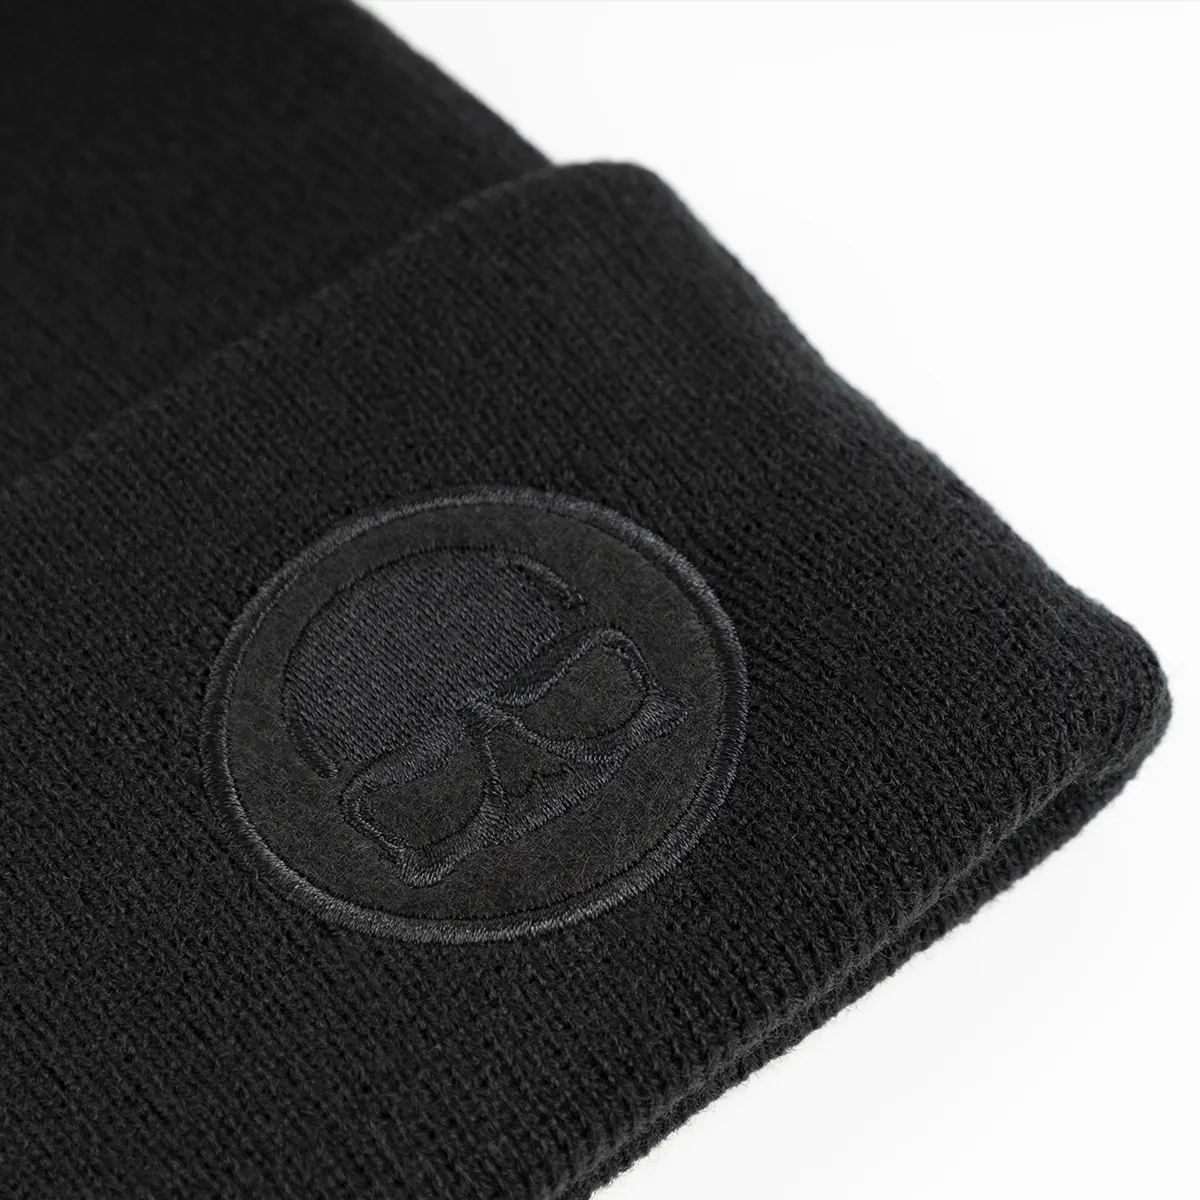 Call of Duty Beanie Hat "Stealth" Black Image 2